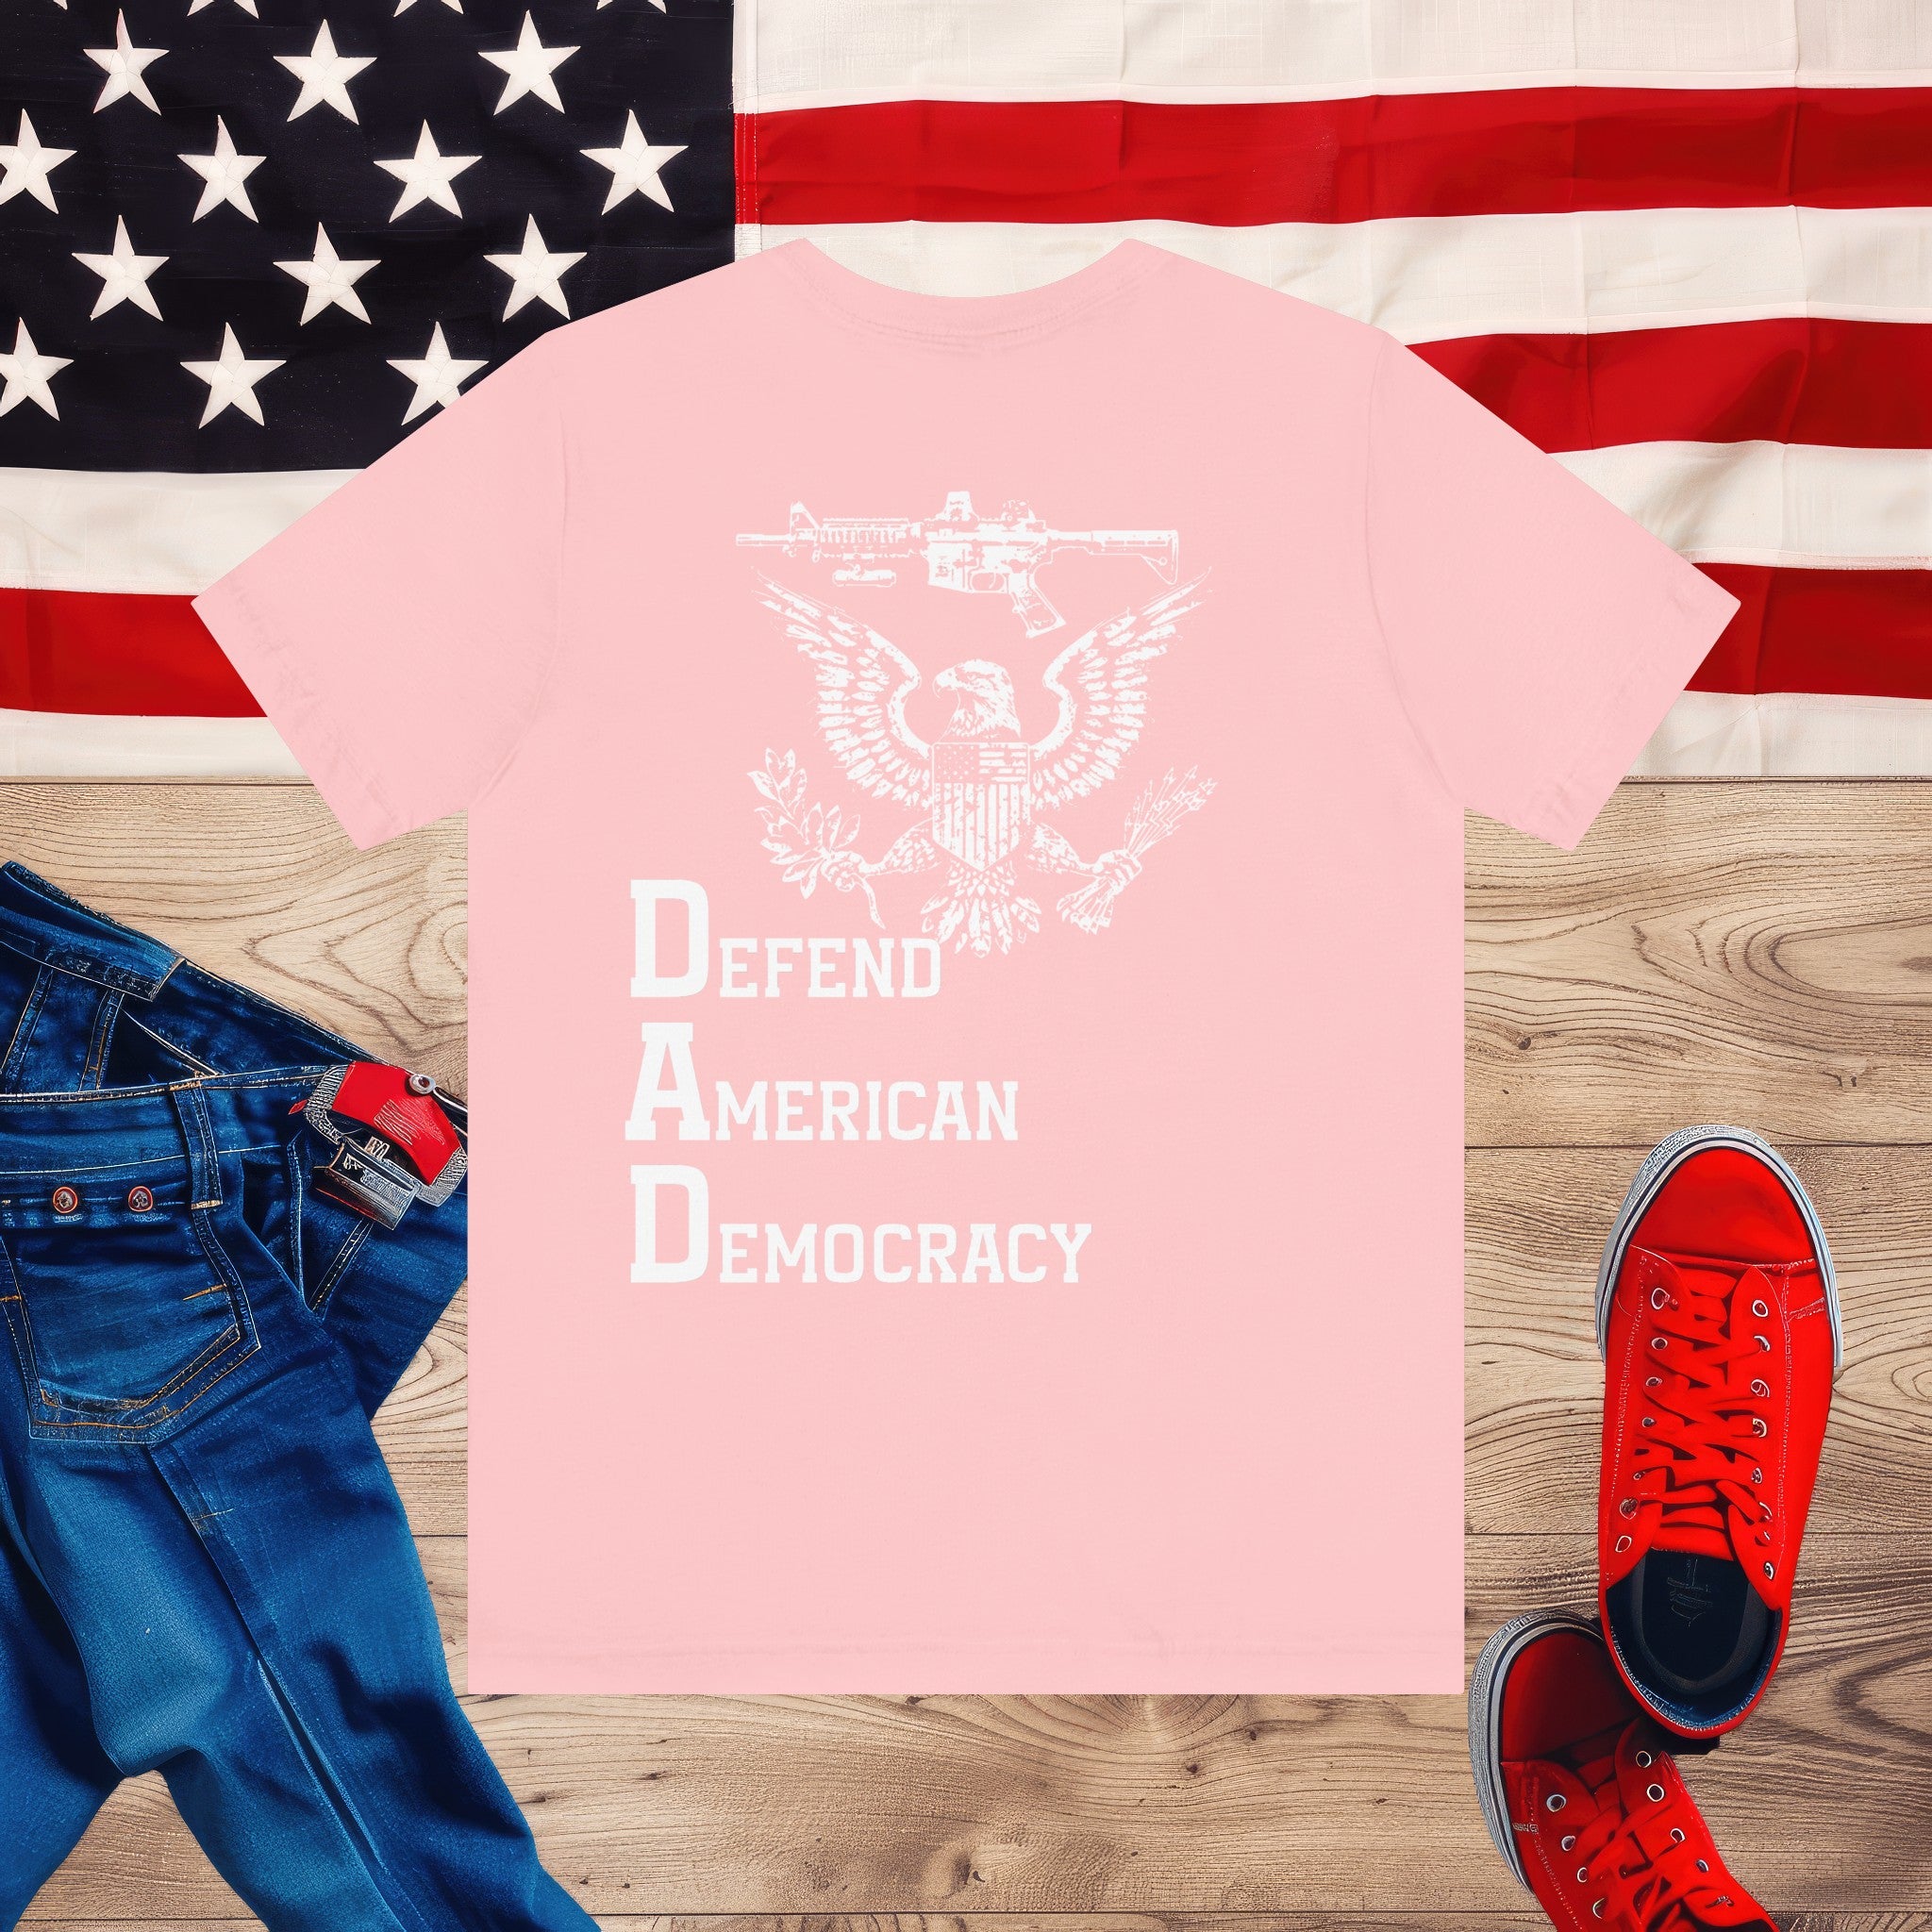 Defend American Democracy T-Shirt, Patriotic Eagle and Rifle Tee, Bold Statement Military Style Shirt, Pro-Democracy USA Apparel